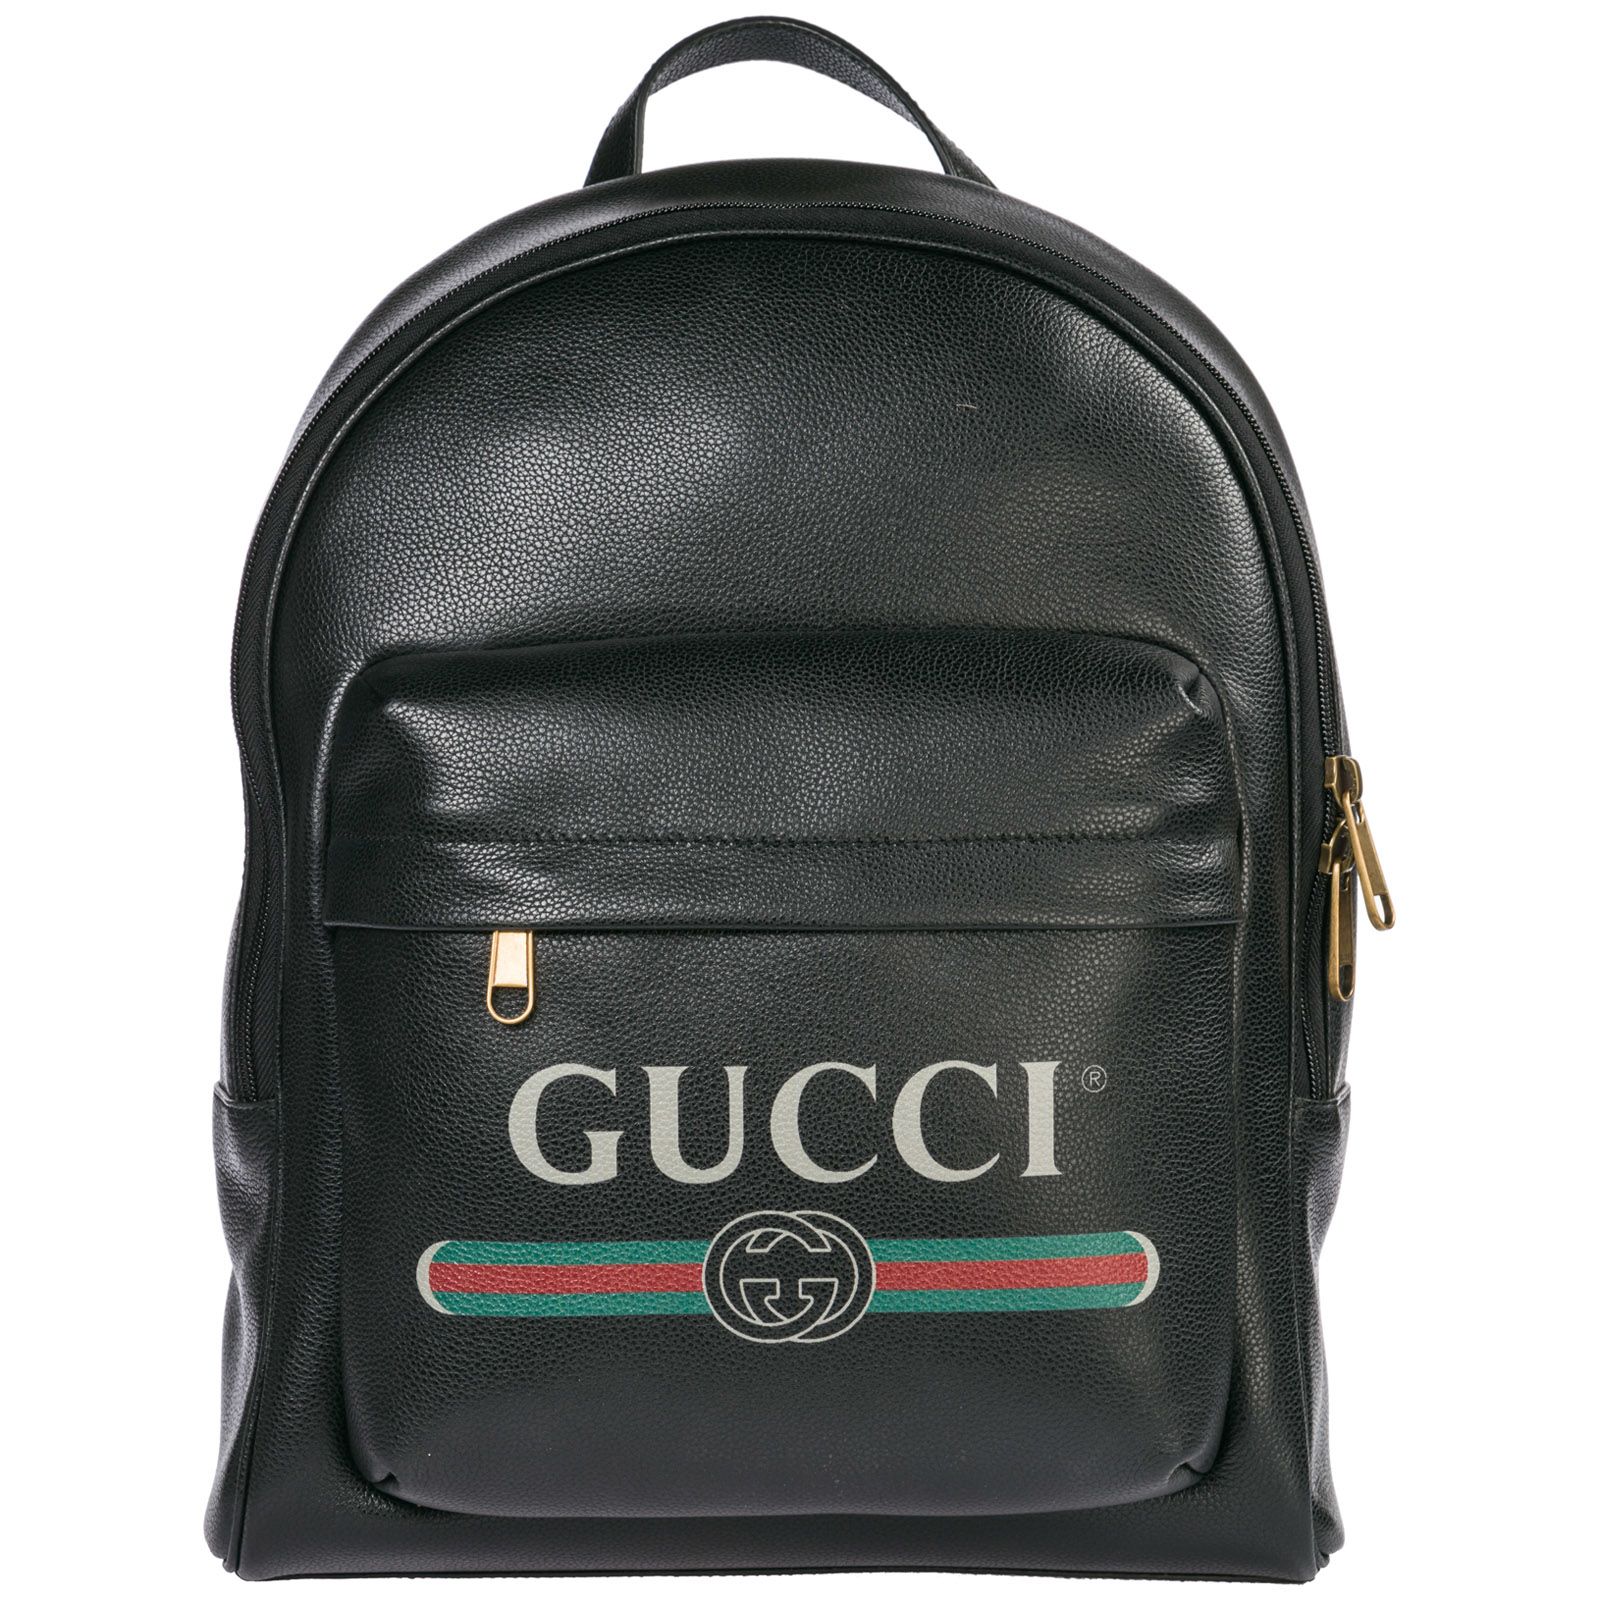 Gucci Gucci Leather Rucksack Backpack Travel - Black - 10902029 | italist